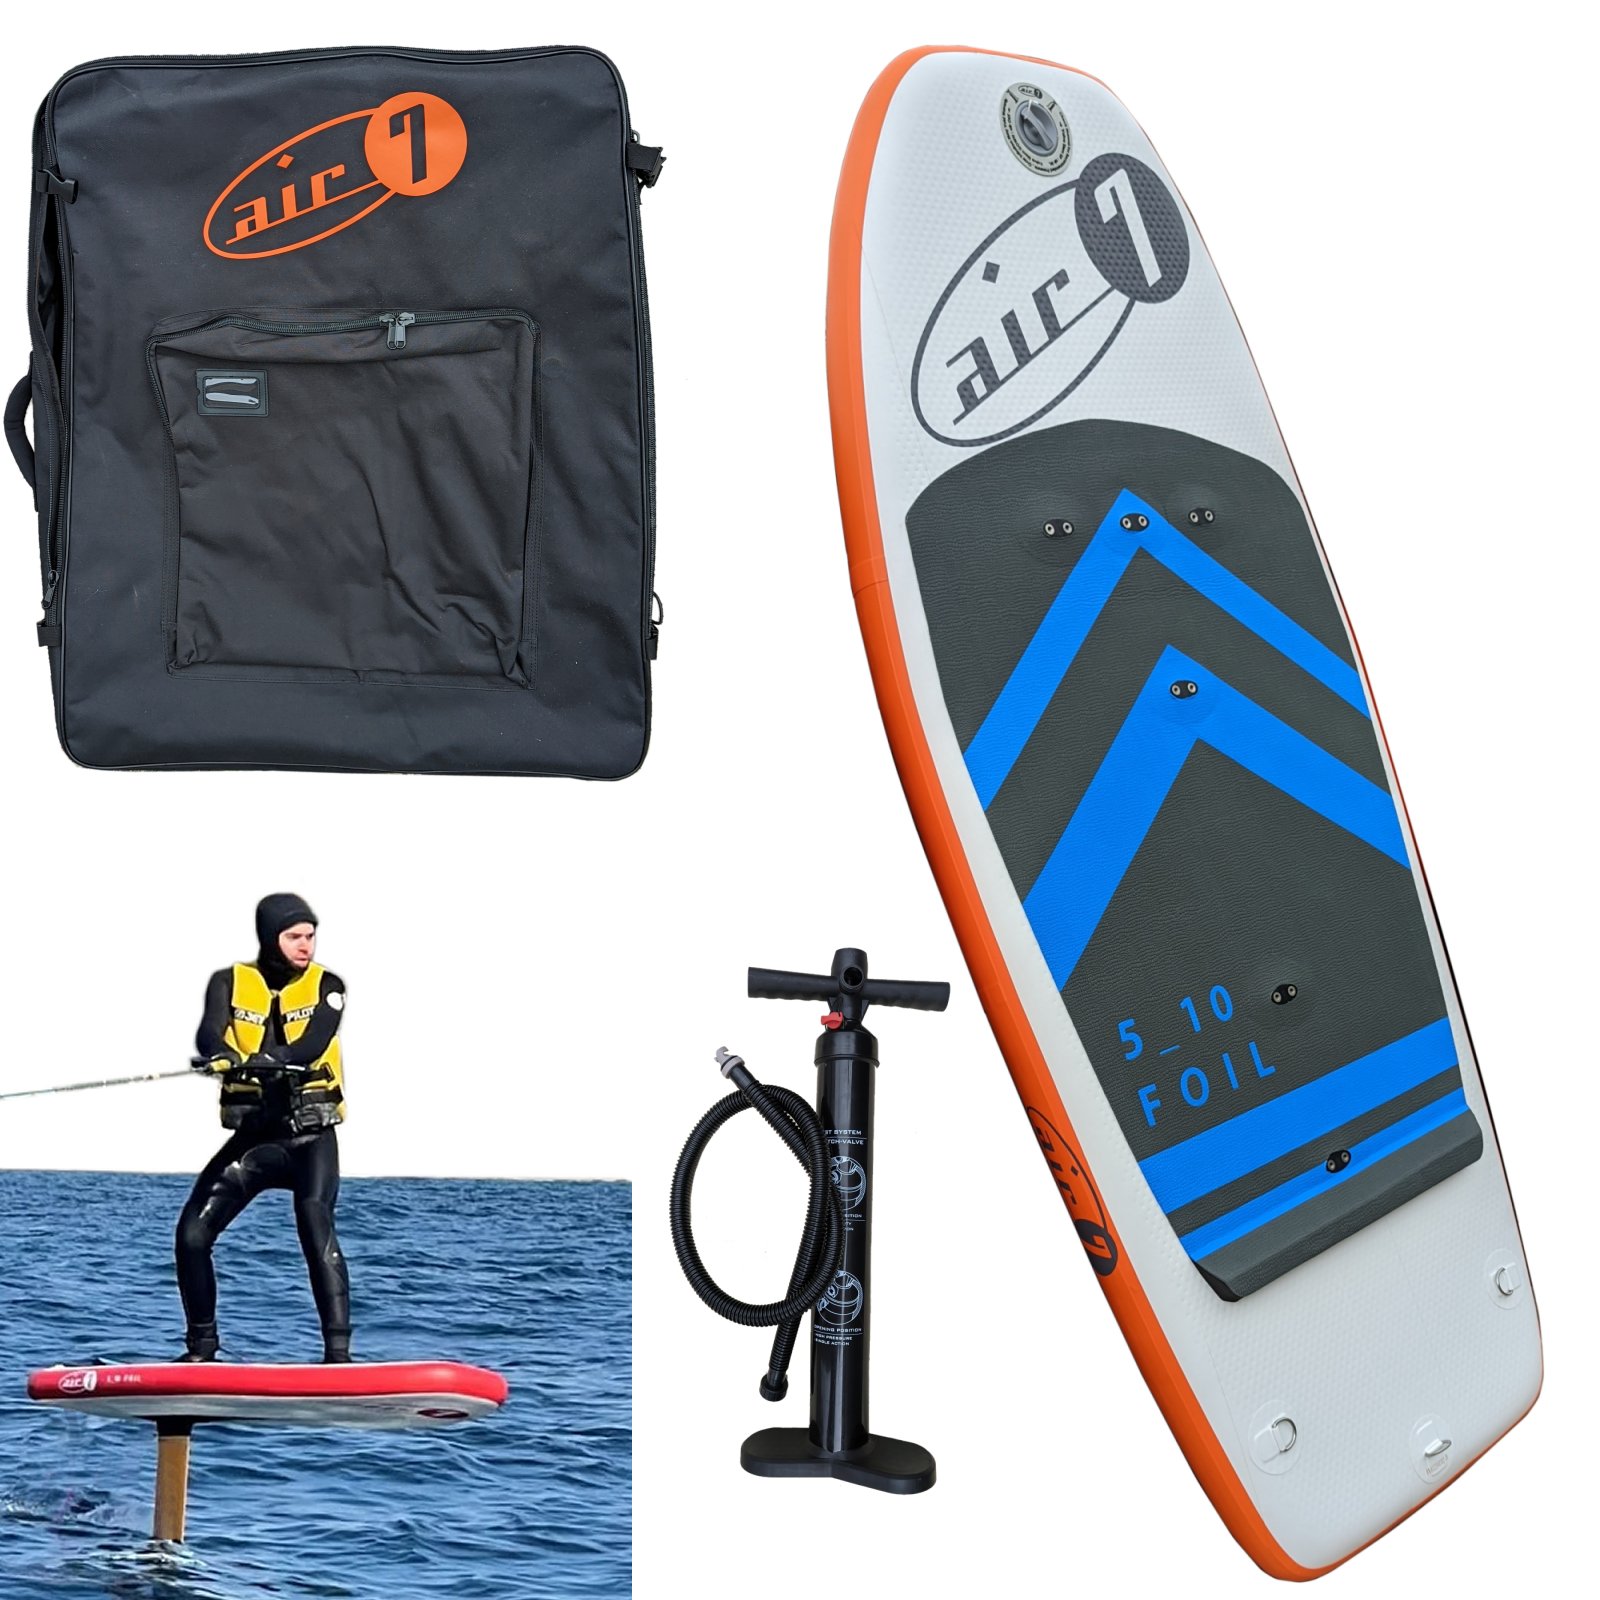 SUP WING FOIL ボードセット starboard | labiela.com